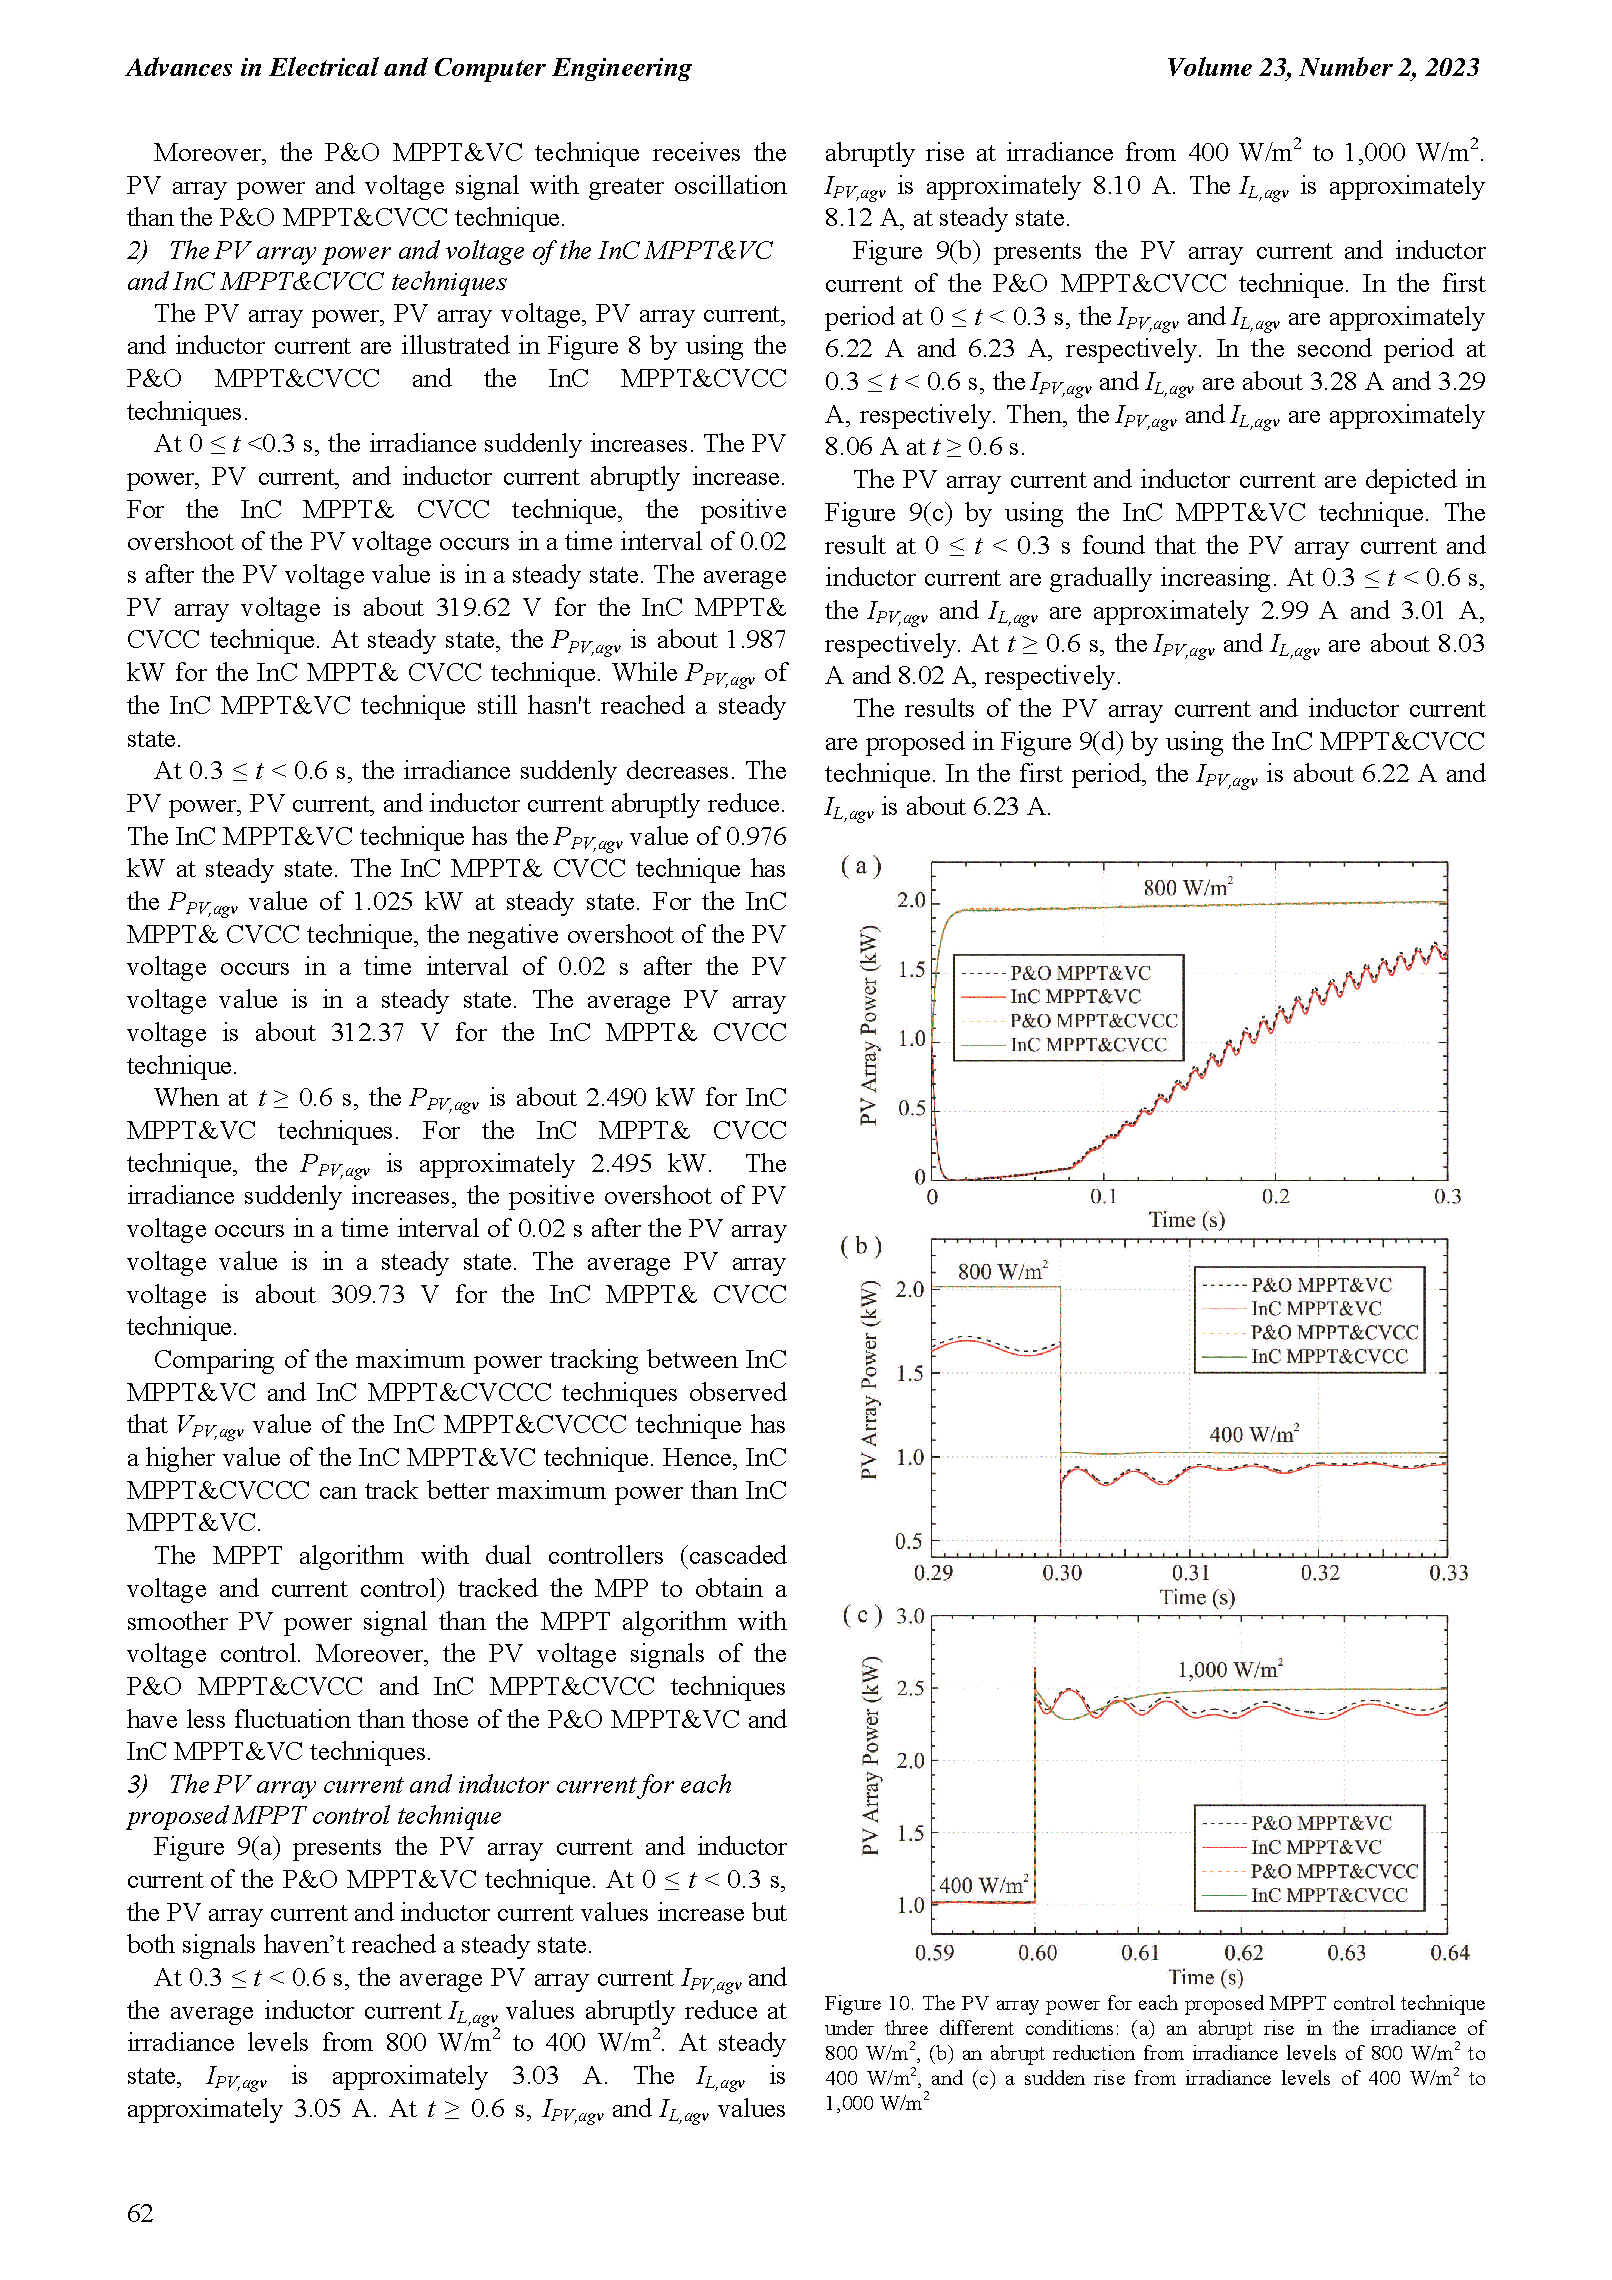 PDF Quickview for paper with DOI:10.4316/AECE.2023.02007